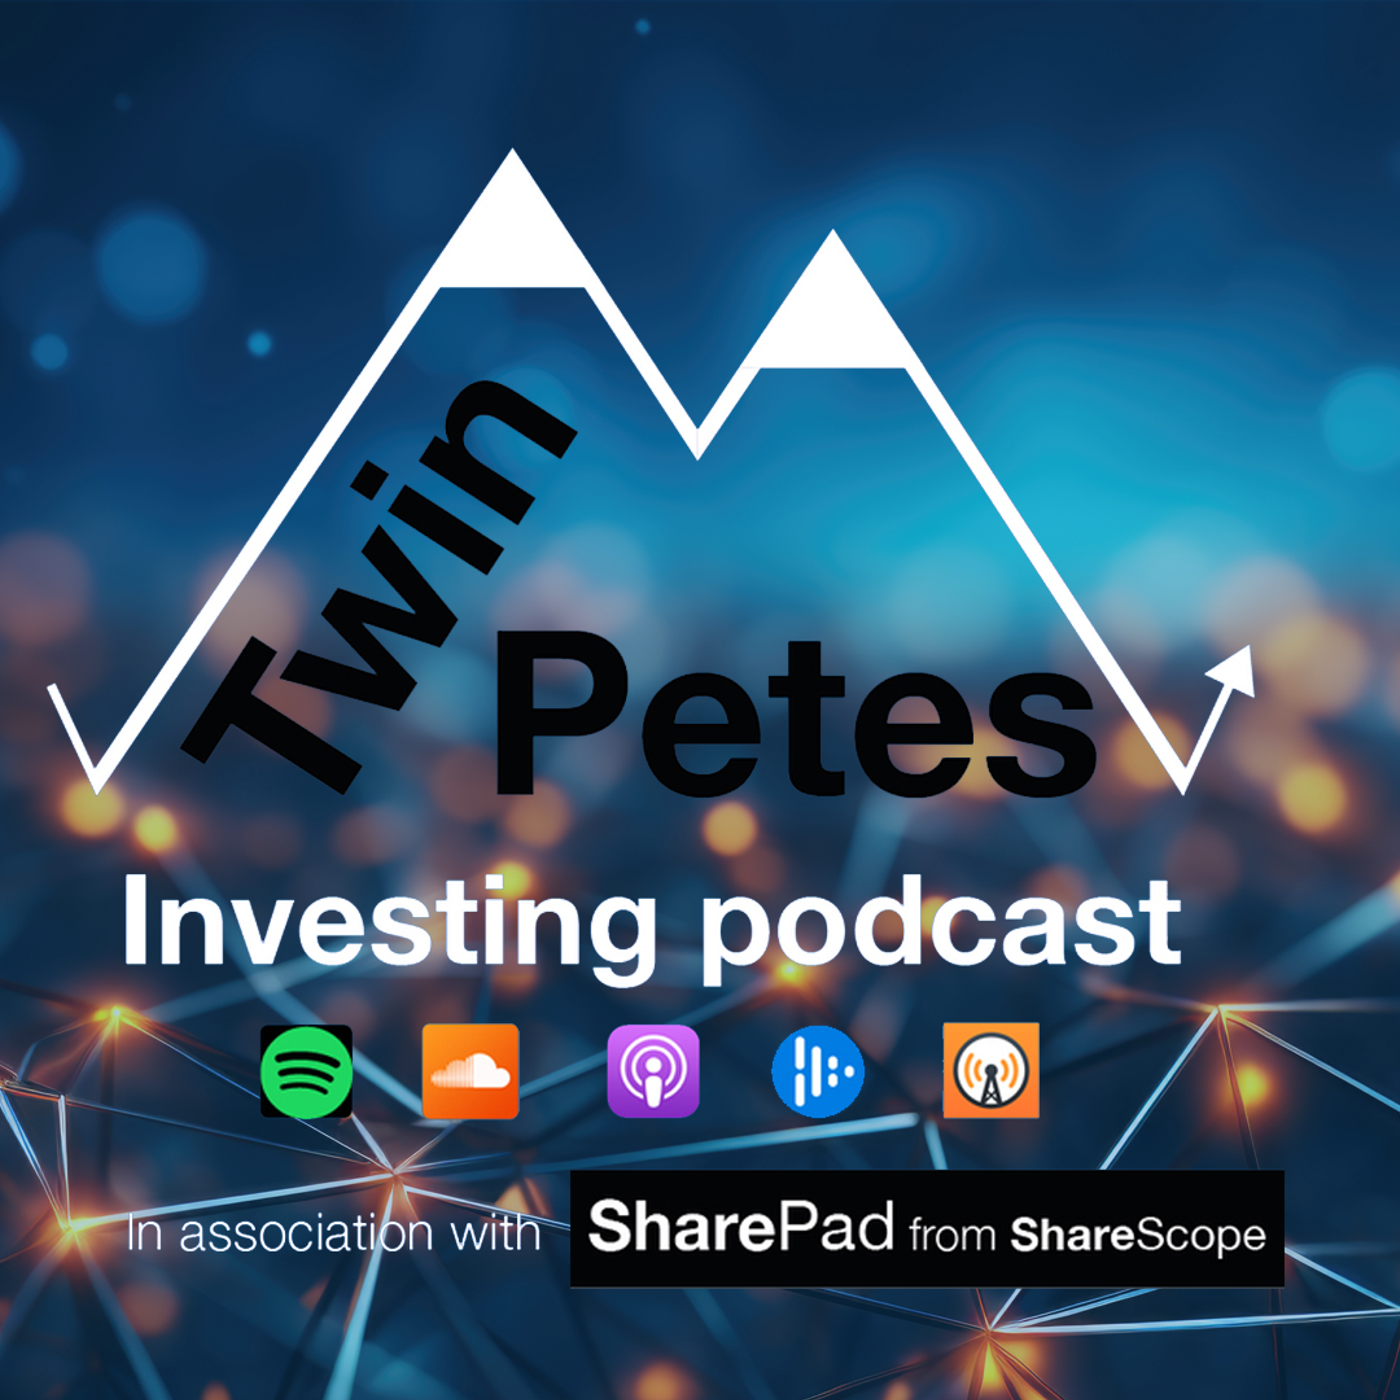 176: TWIN PETES INVESTING Podcast no.123: With special guest Algy Hall of Citywire, Finding winning elite companies, Rolls Royce, Unilever, Renault, Reckitt Benckiser, BridgeBio Pharma, Mortgage Advic